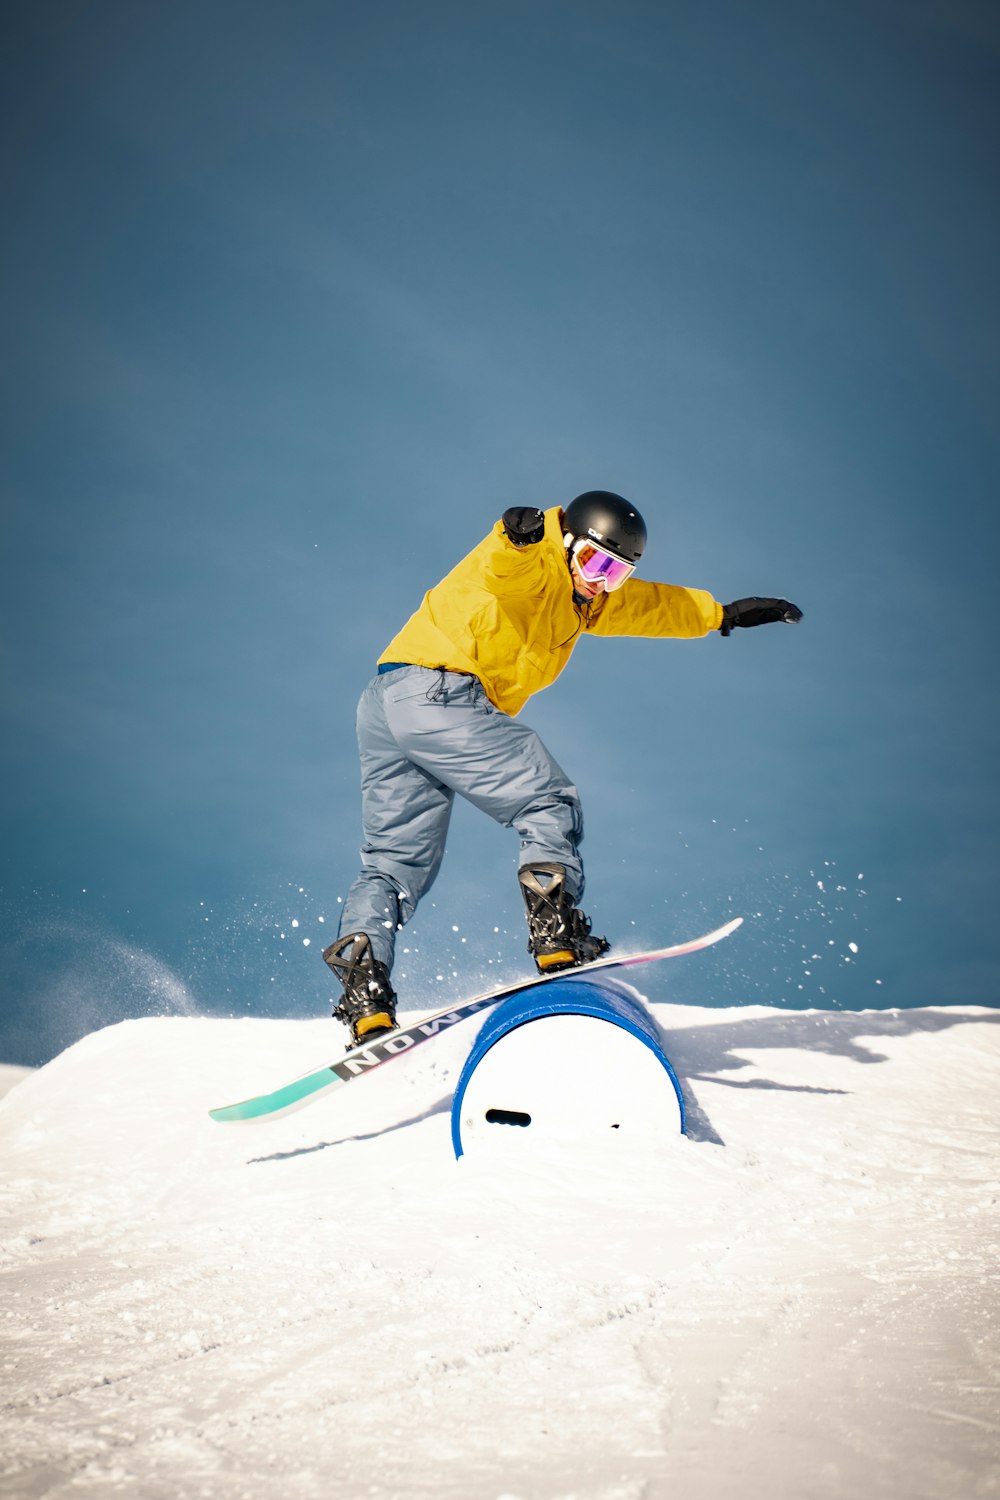 man in yellow jacket and gray pants riding on blue snowboard during daytime